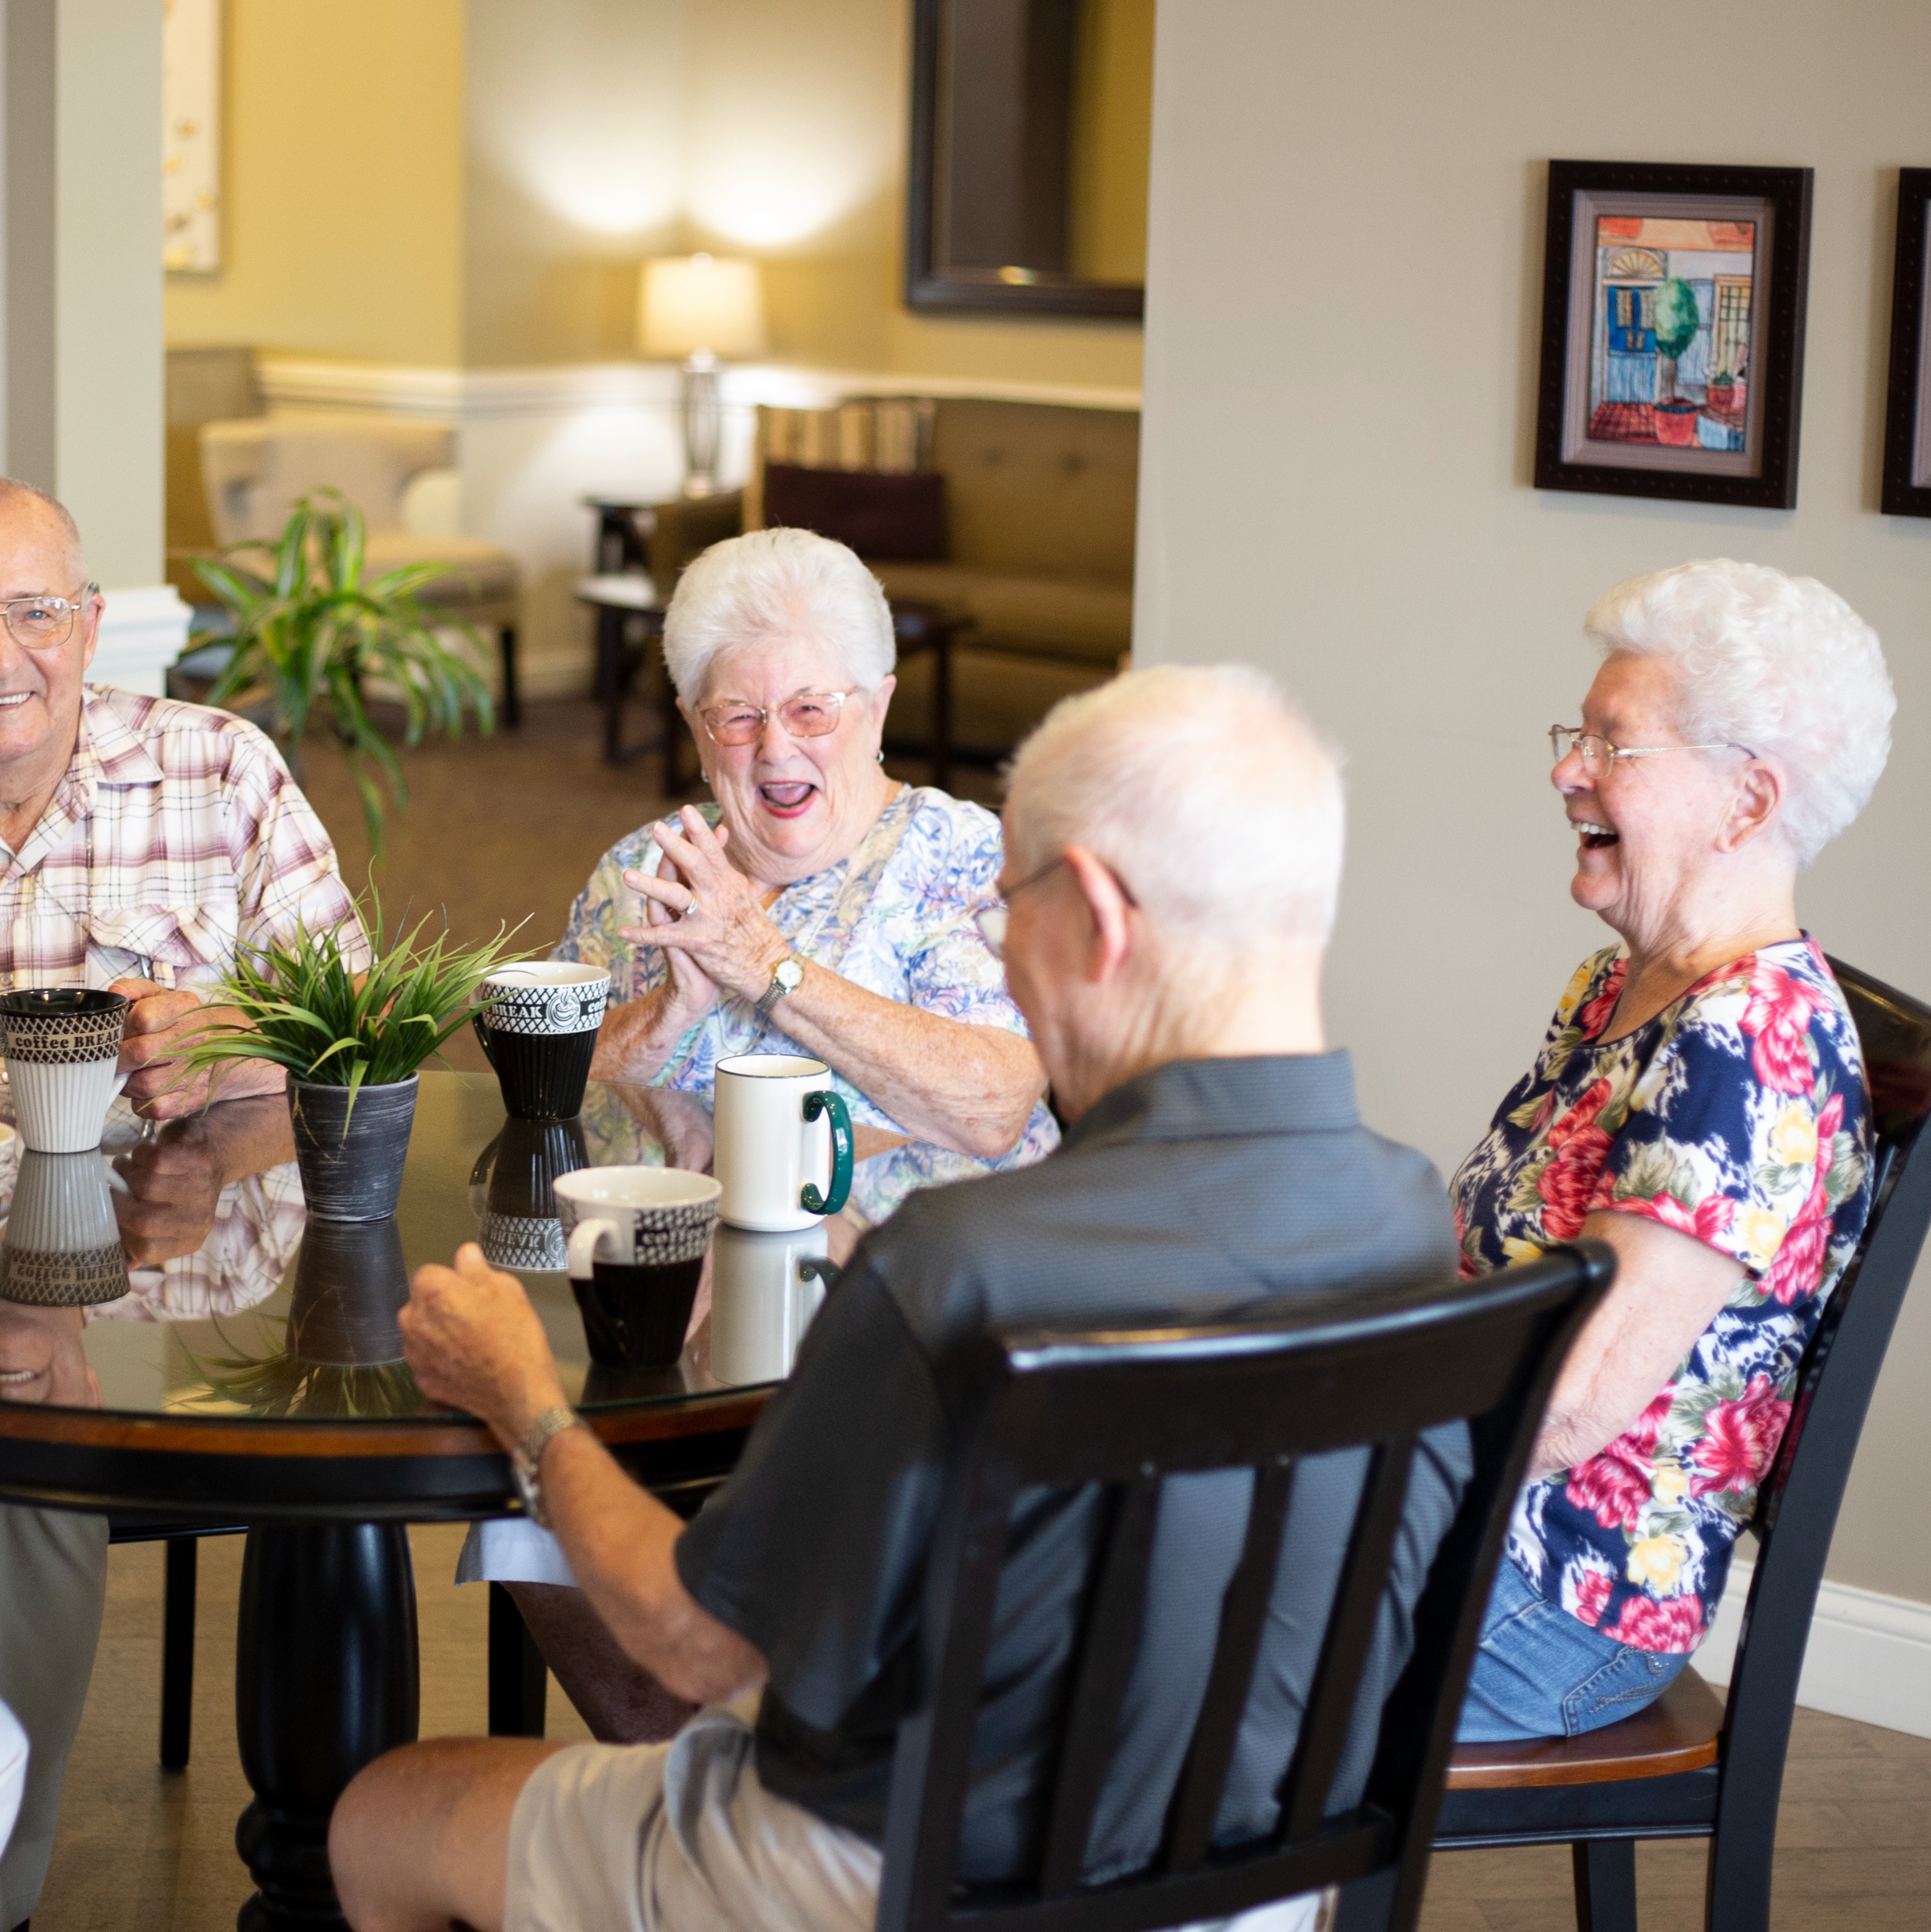 residents having coffee at a table and laughing